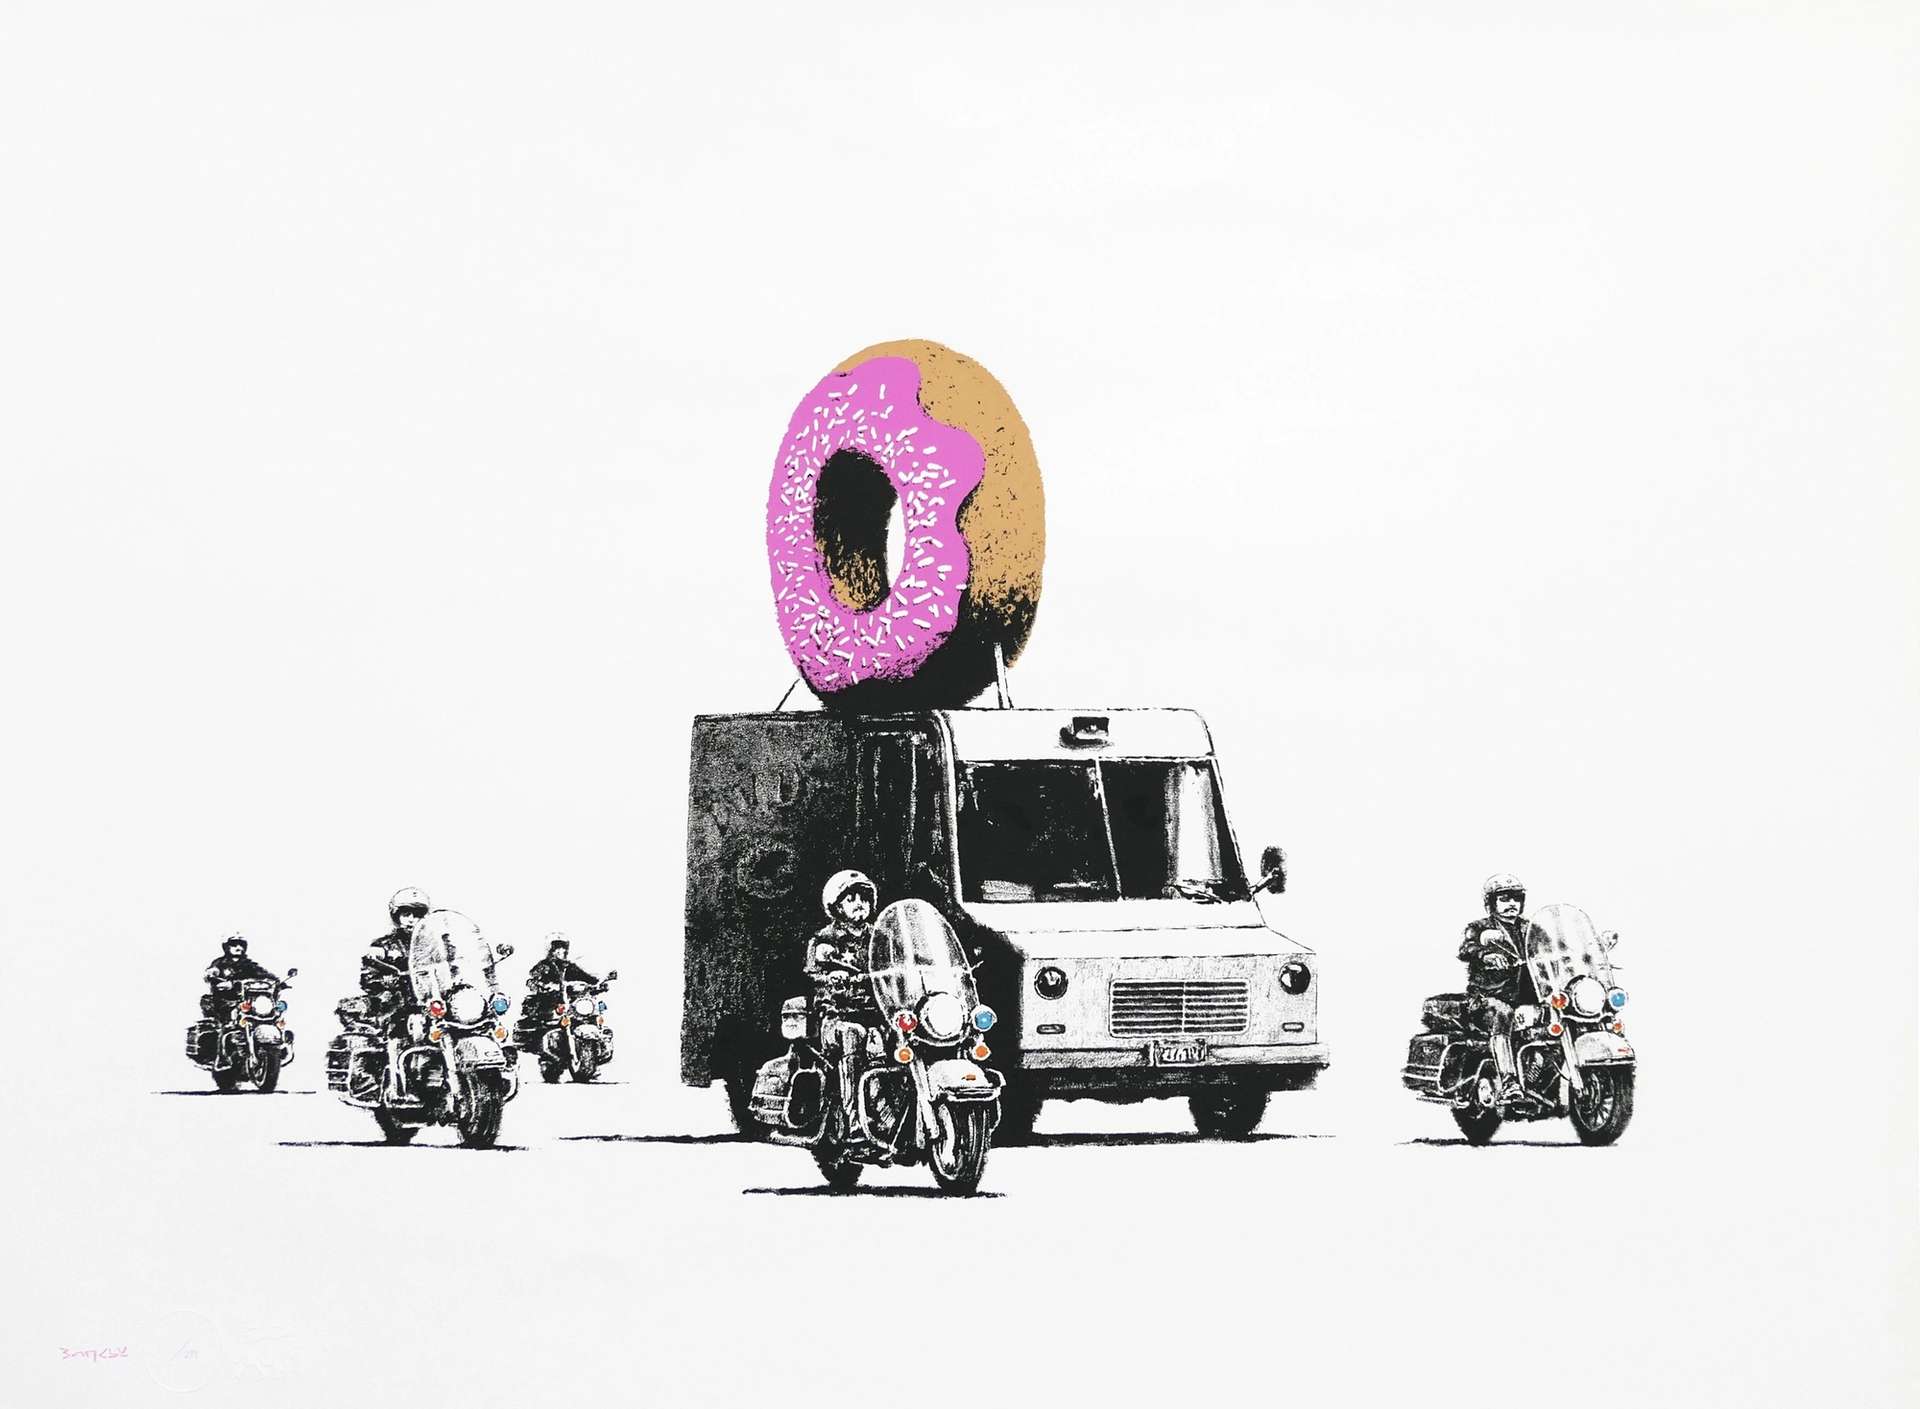 Donuts (strawberry) by Banksy